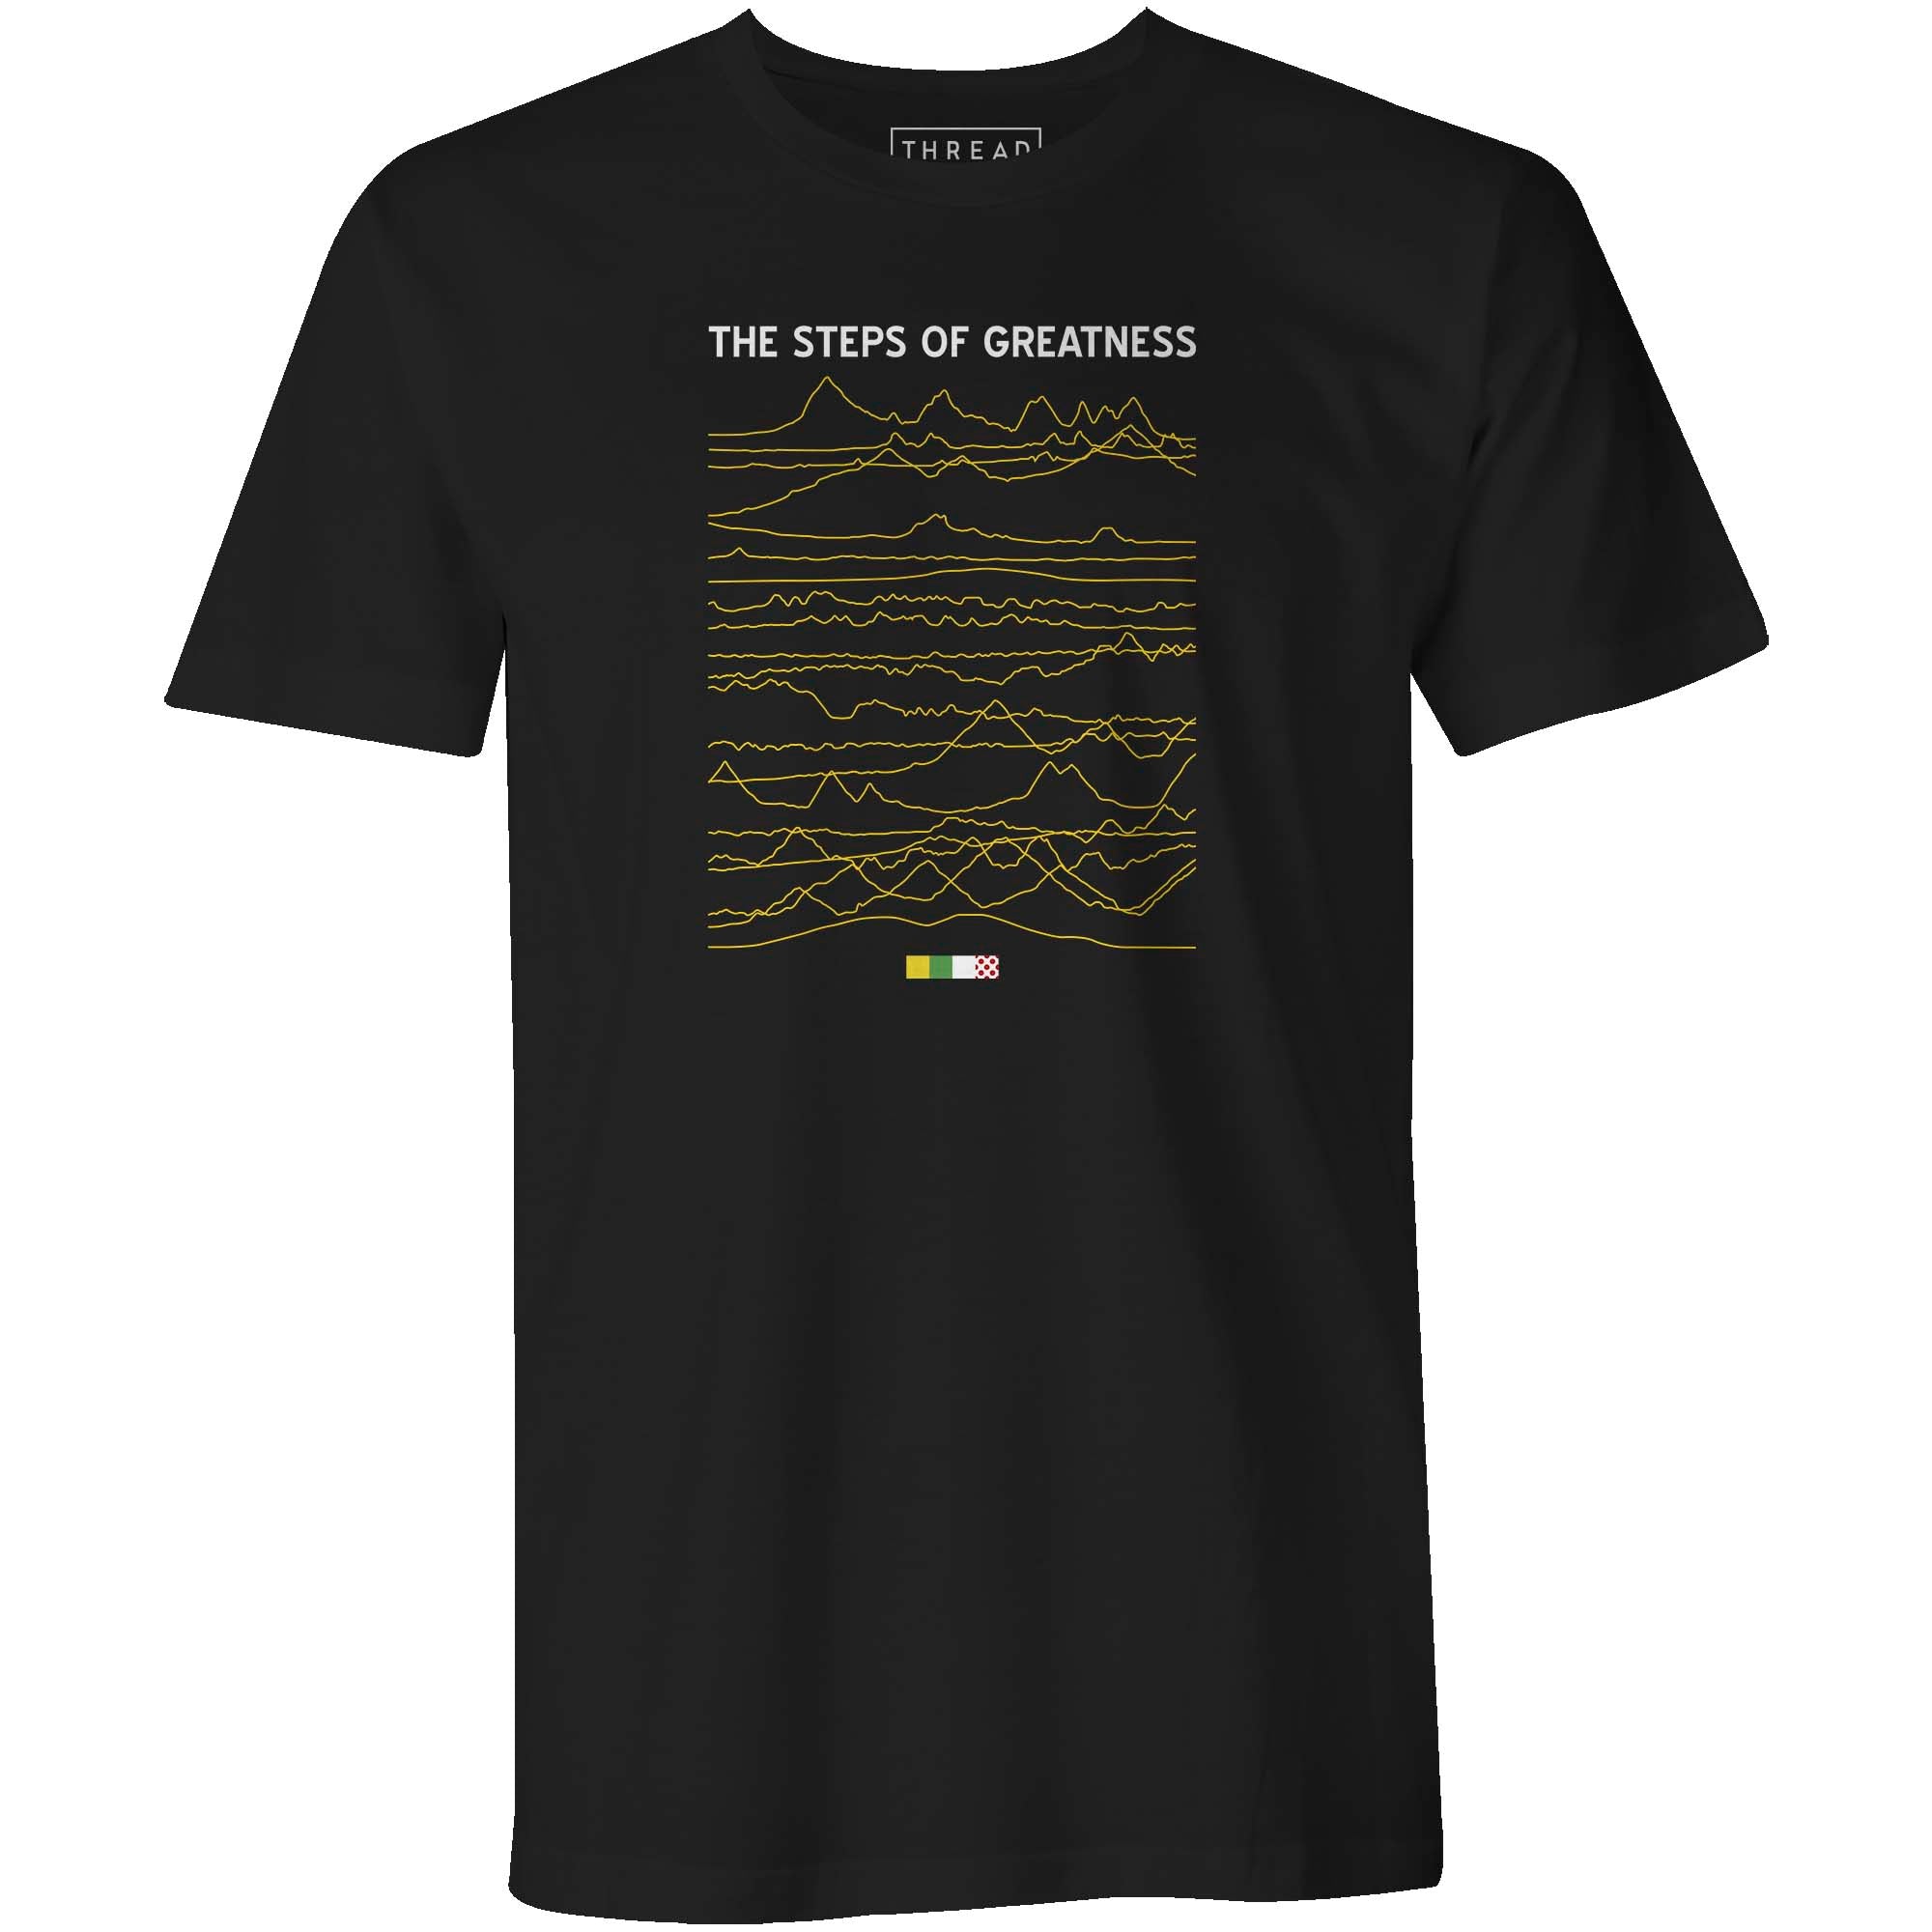 Men's T-shirt - The Steps of Greatness